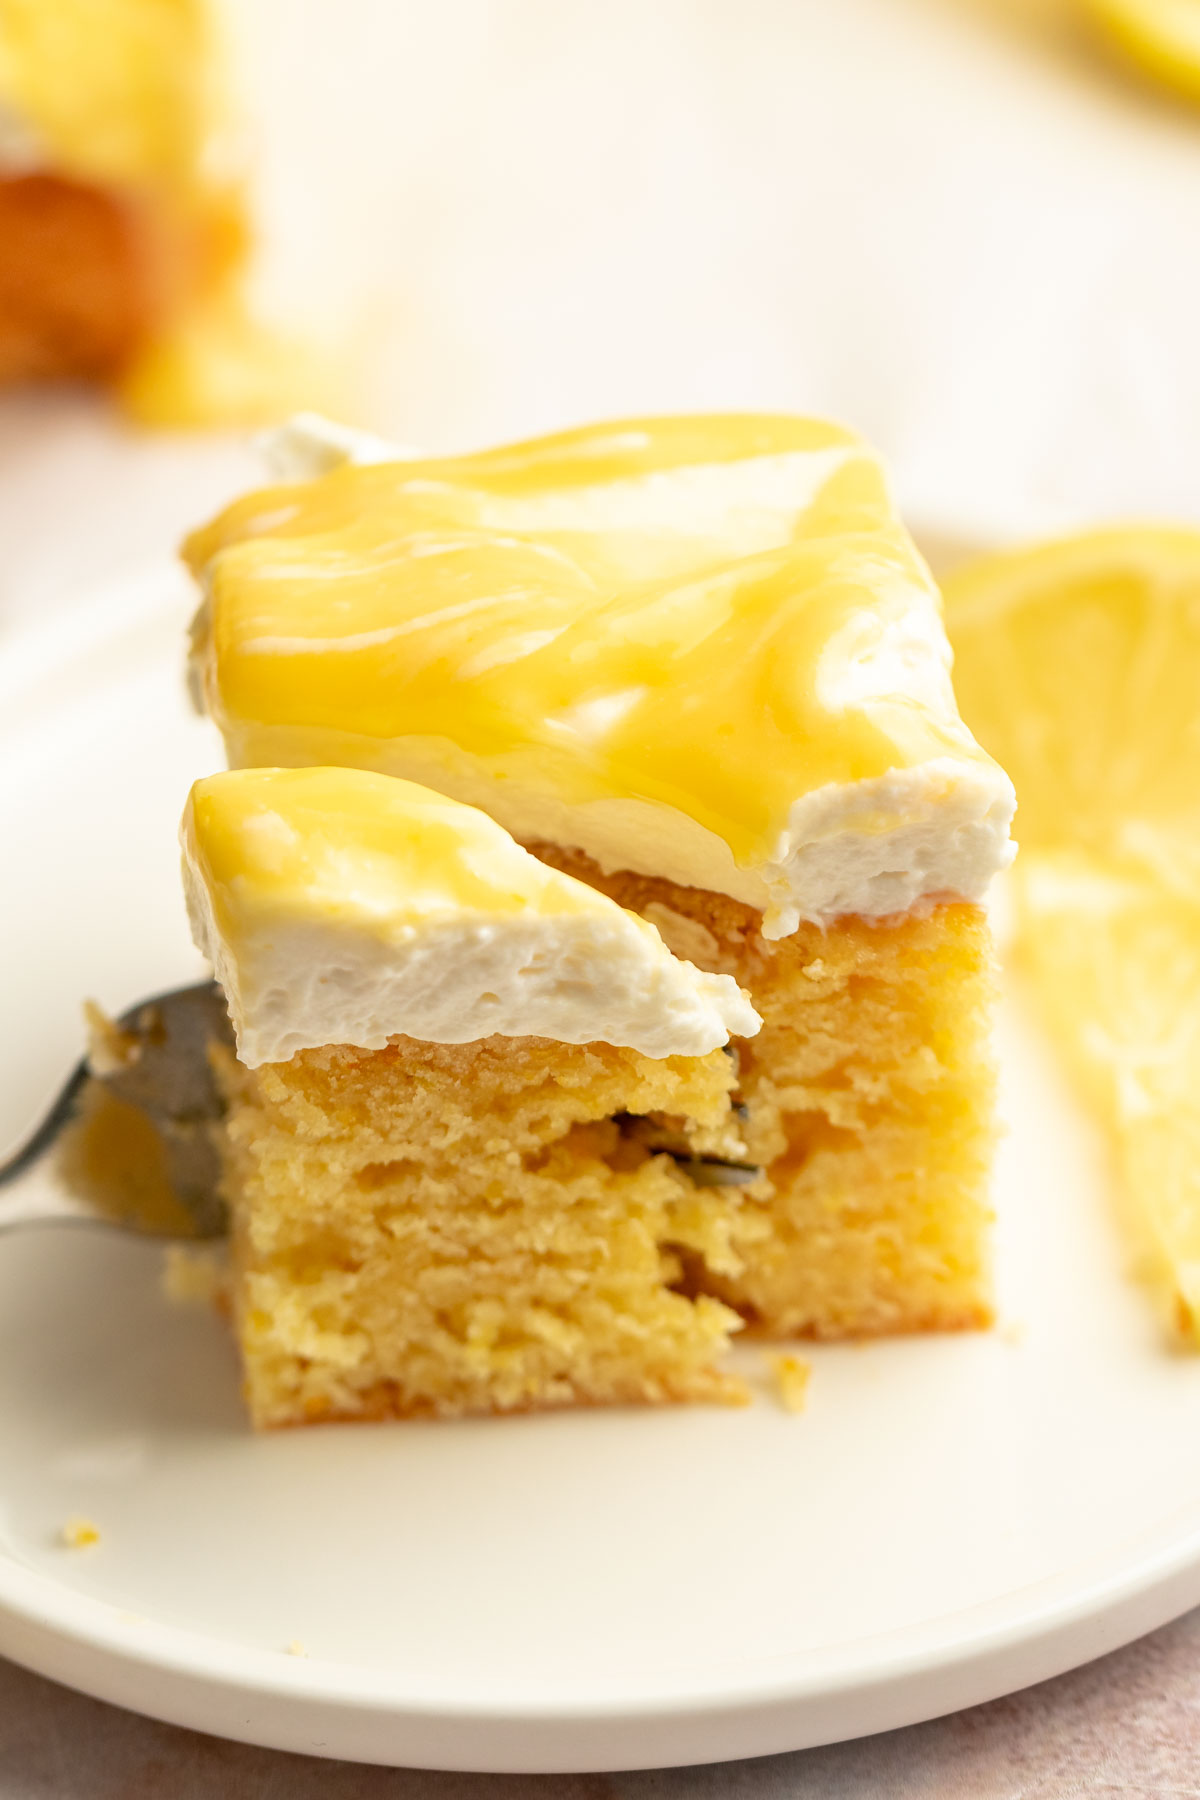 Slice of limoncello mascarpone cake on a plate with a fork inserted into the slice.